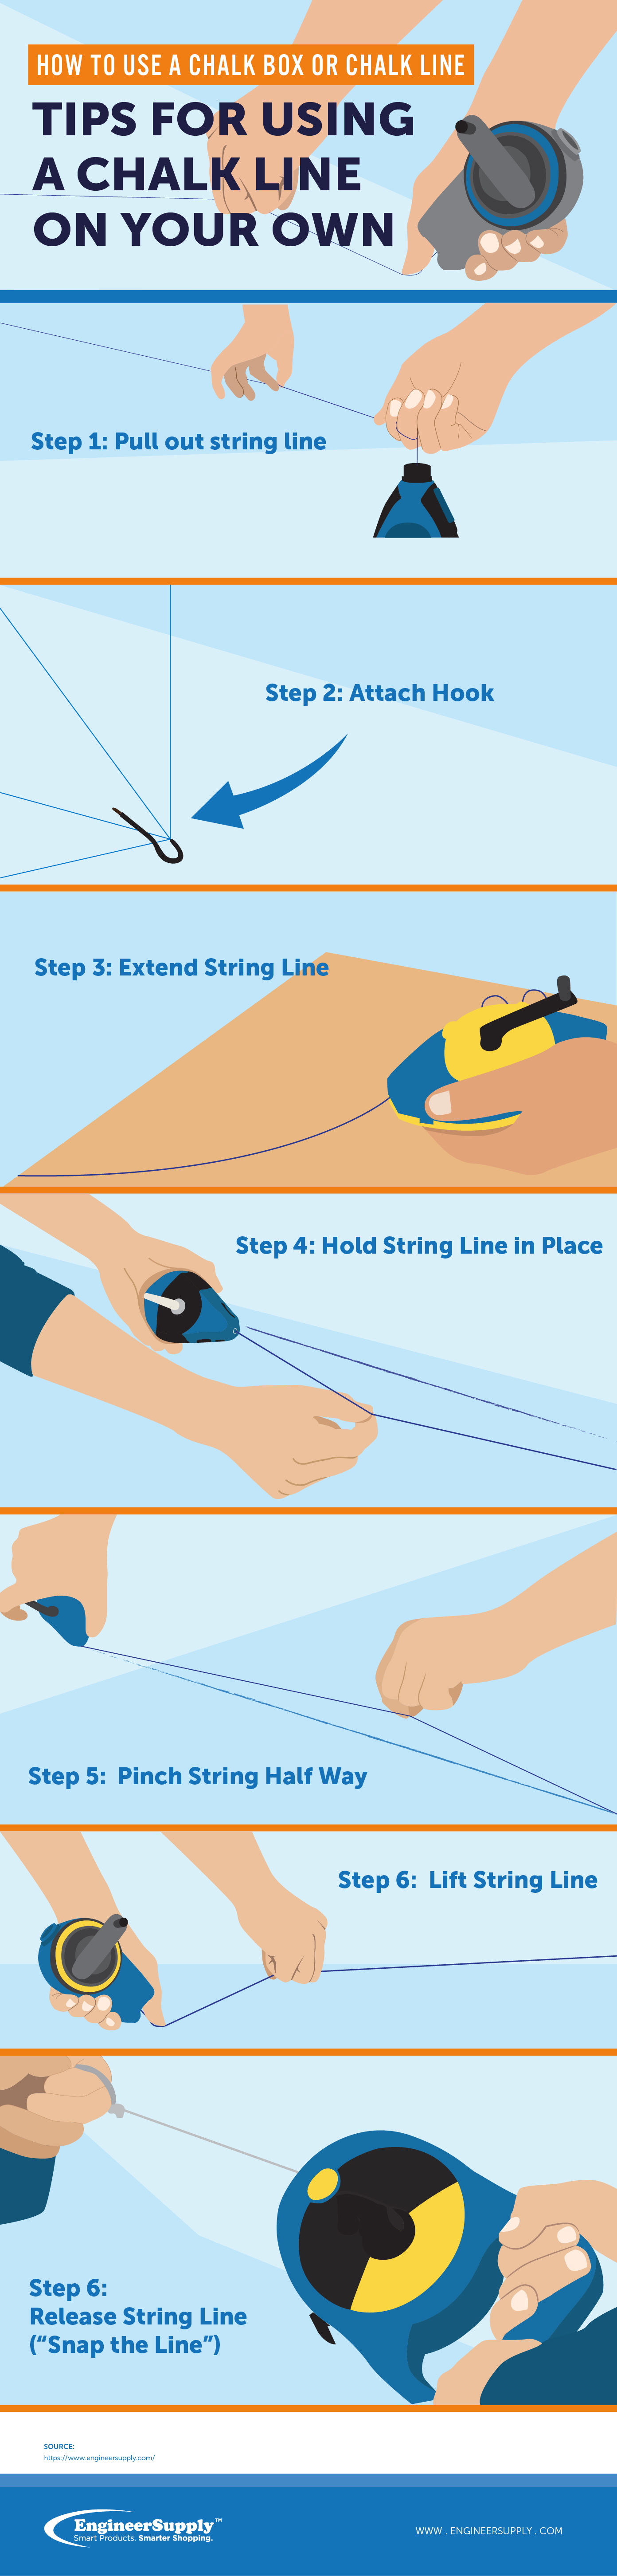 How-to-Use-A-Chalk-Box-or-Chalk-Line-Infographic